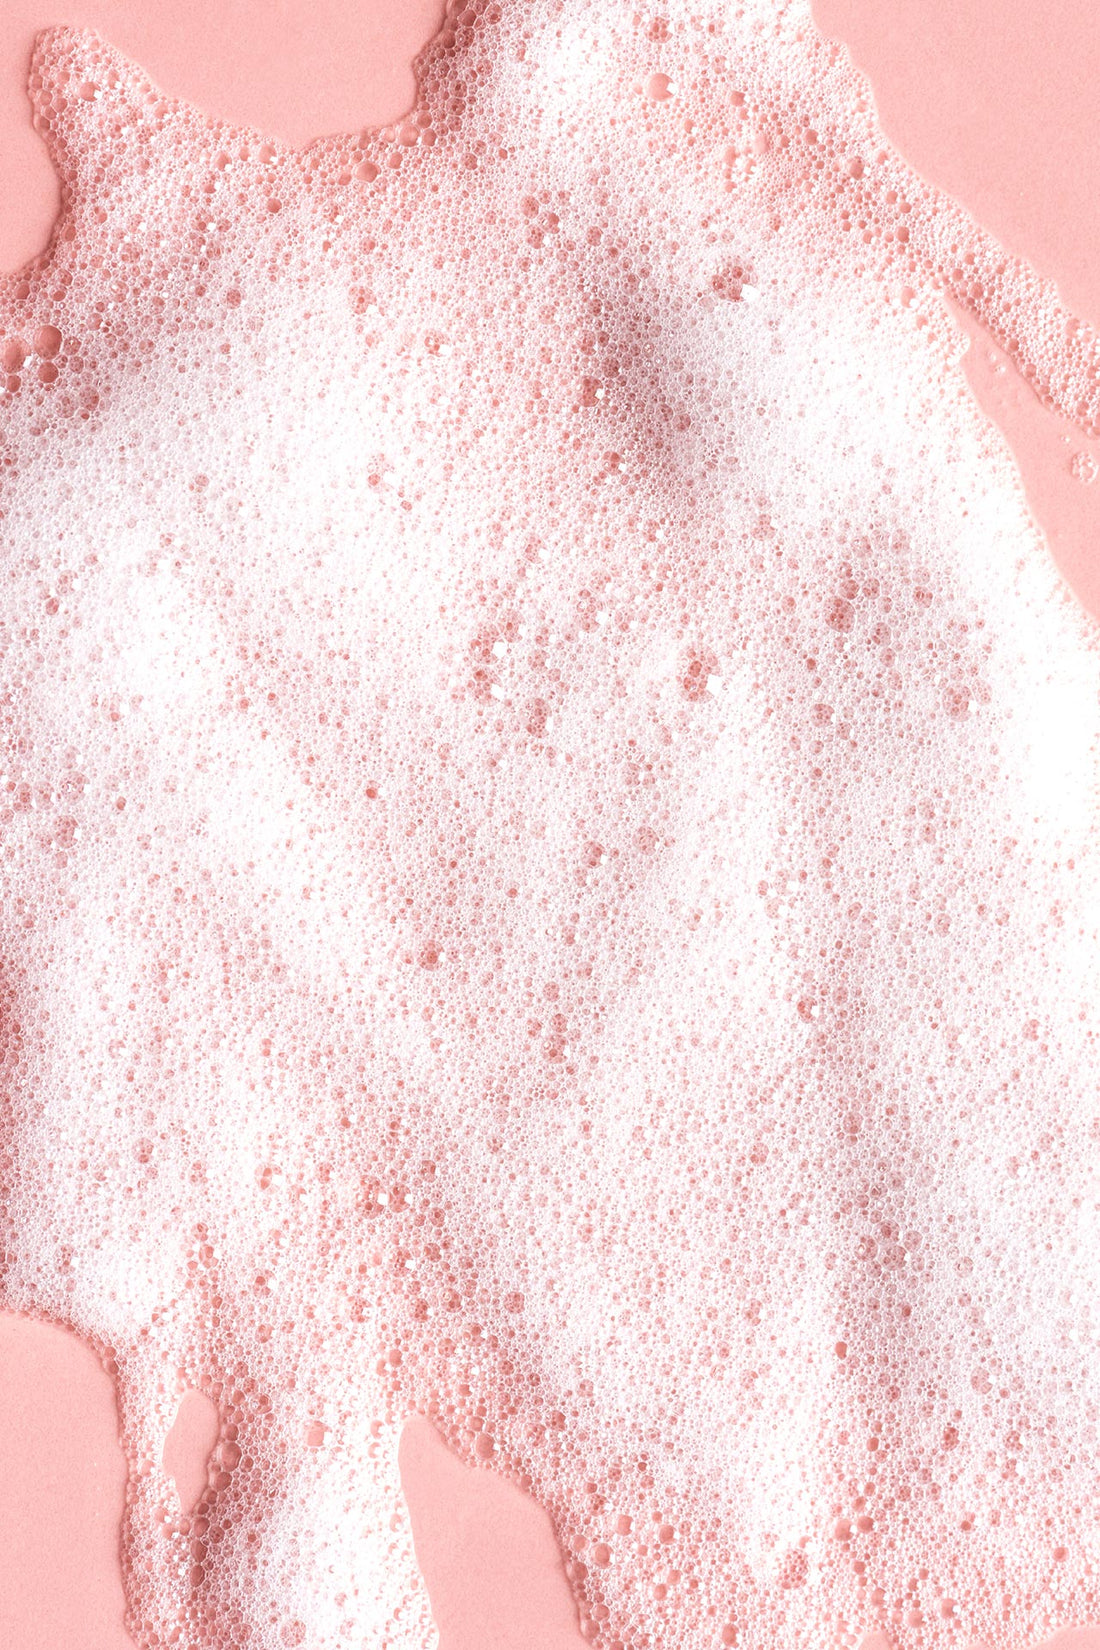 white sudsy foam on pink background